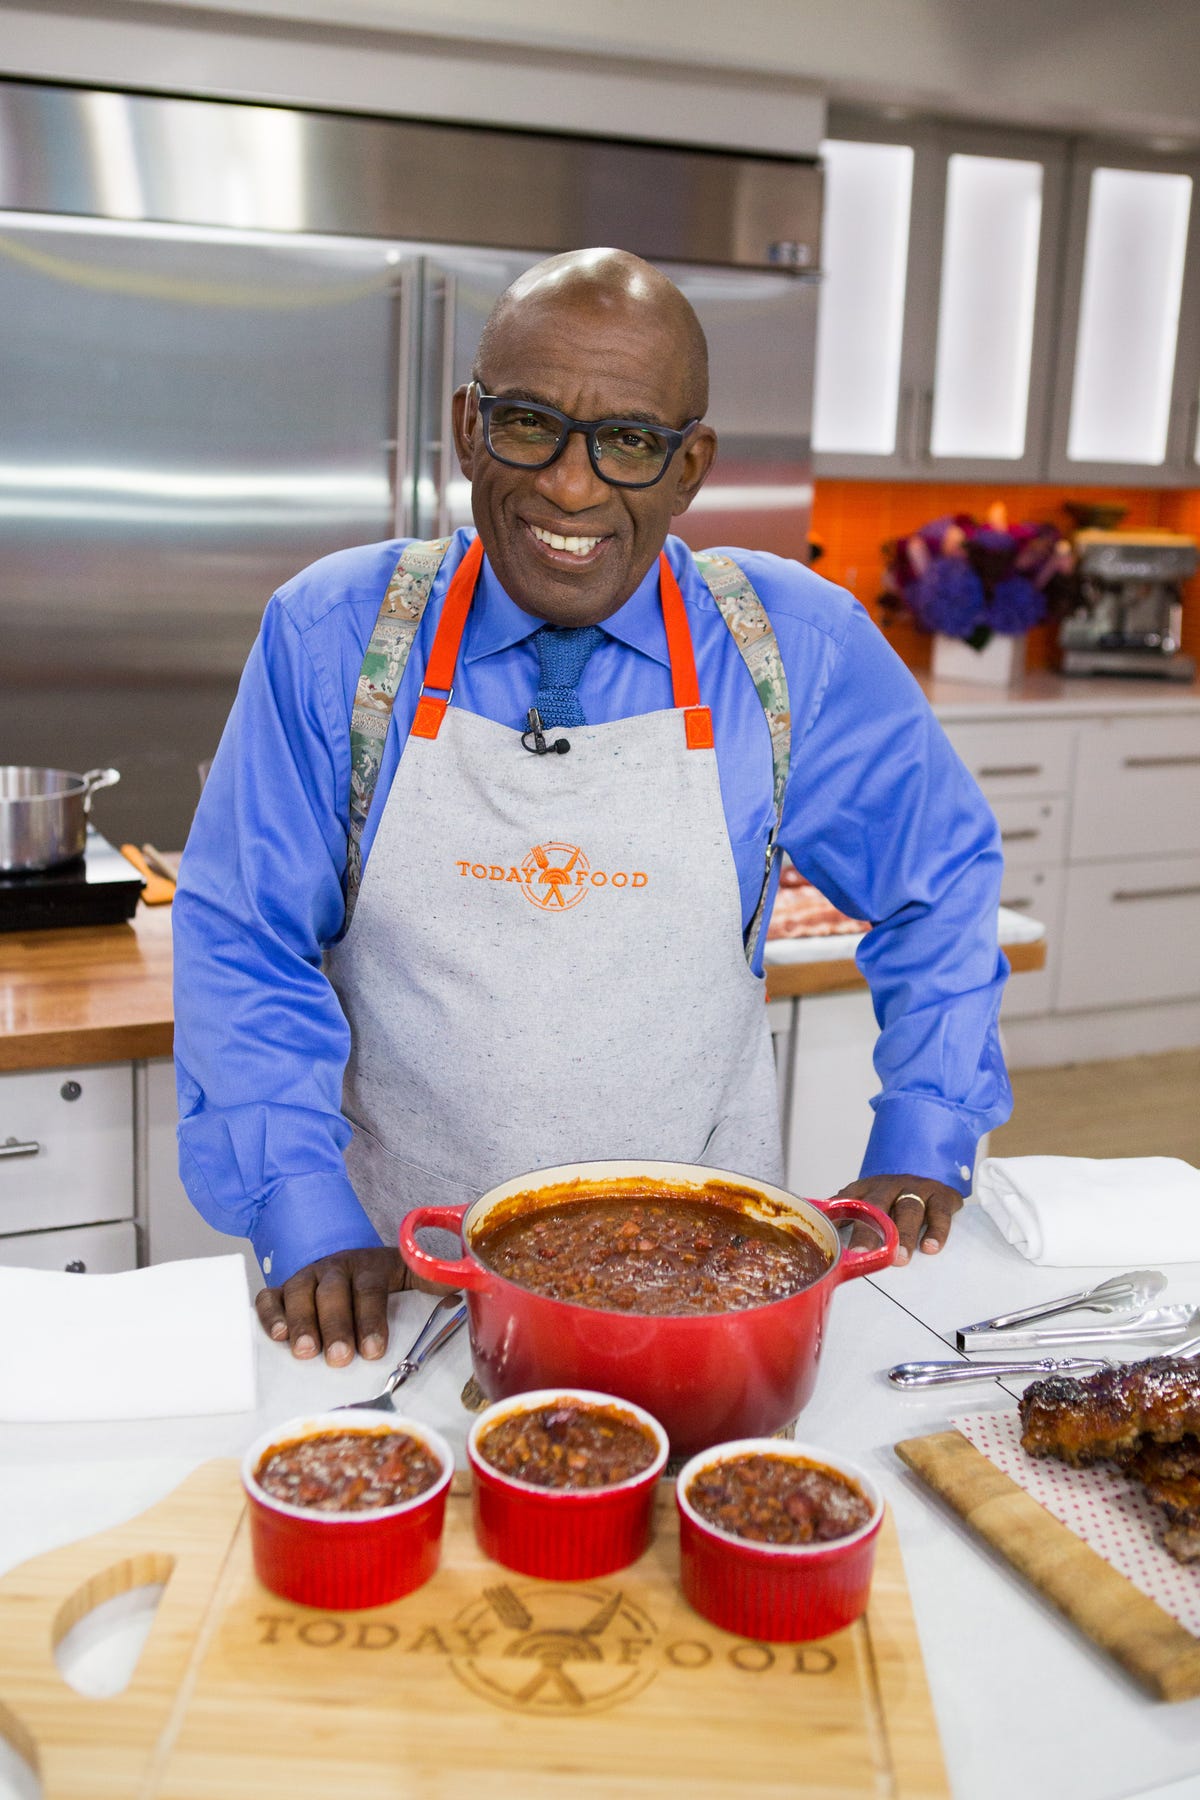 Al Roker Lost 40 Pounds and Lowered Cholesterol on Keto Diet